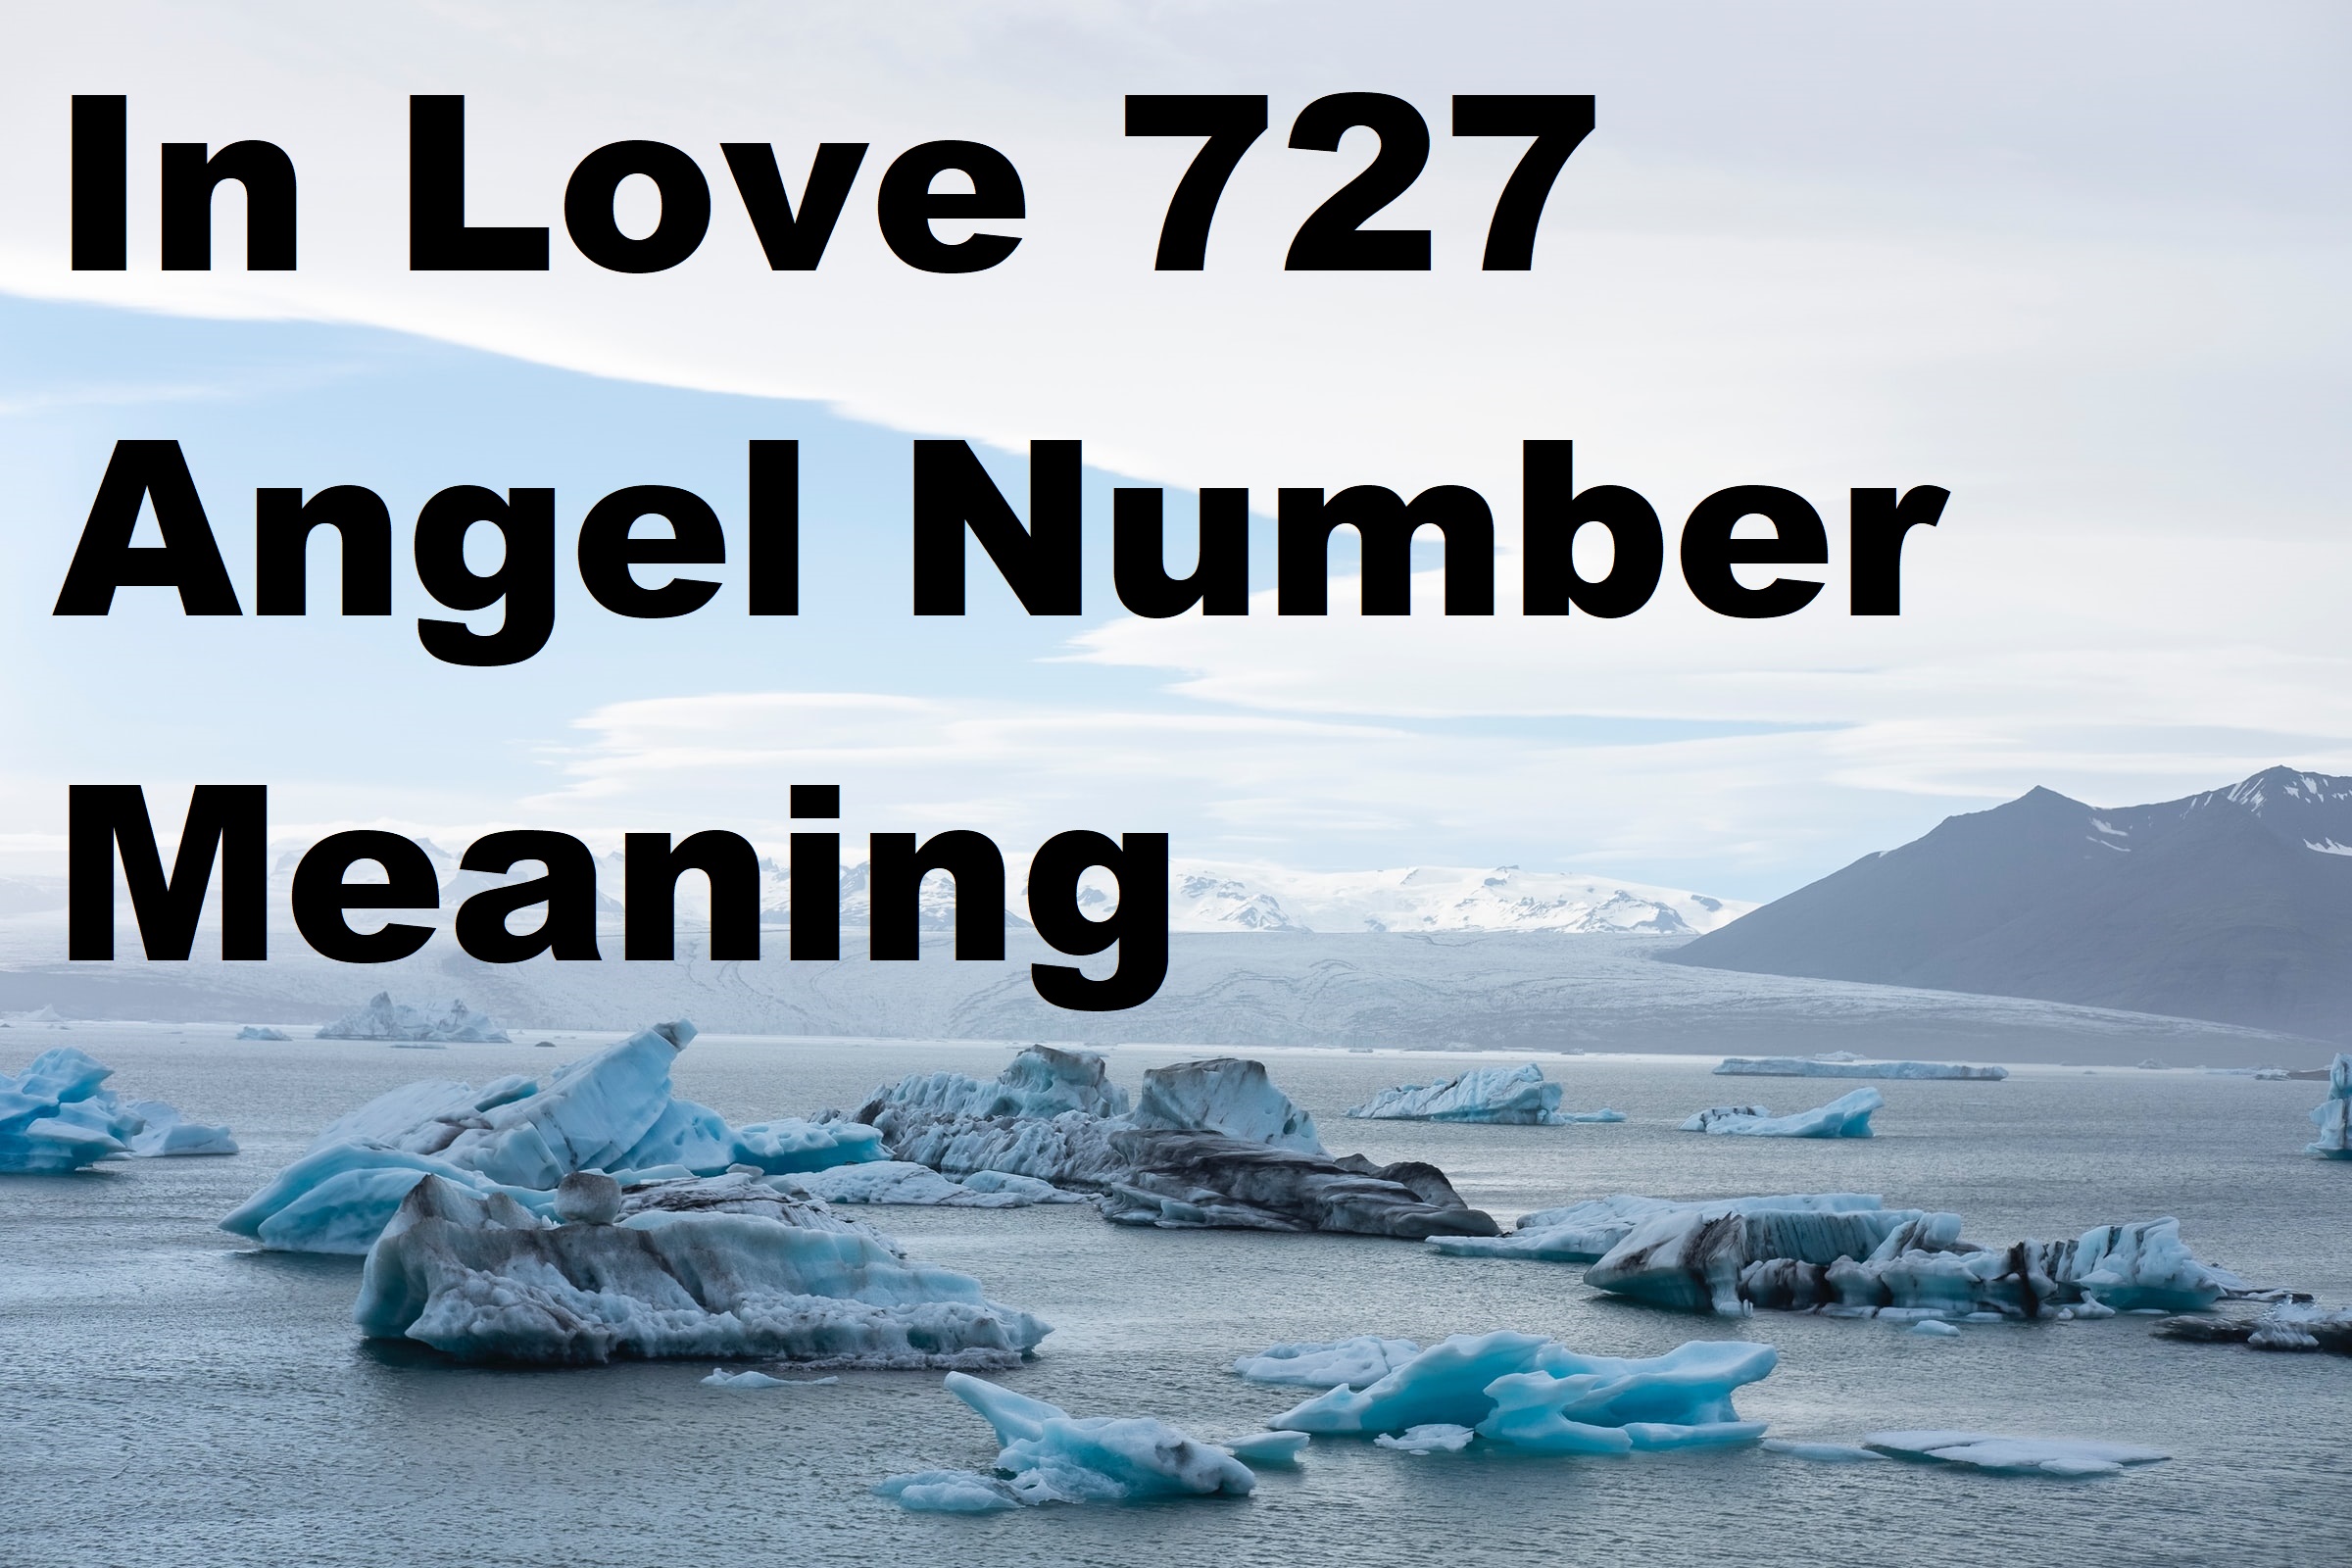 In Love 727 Angel Number Meaning text on a lake with iceberg background